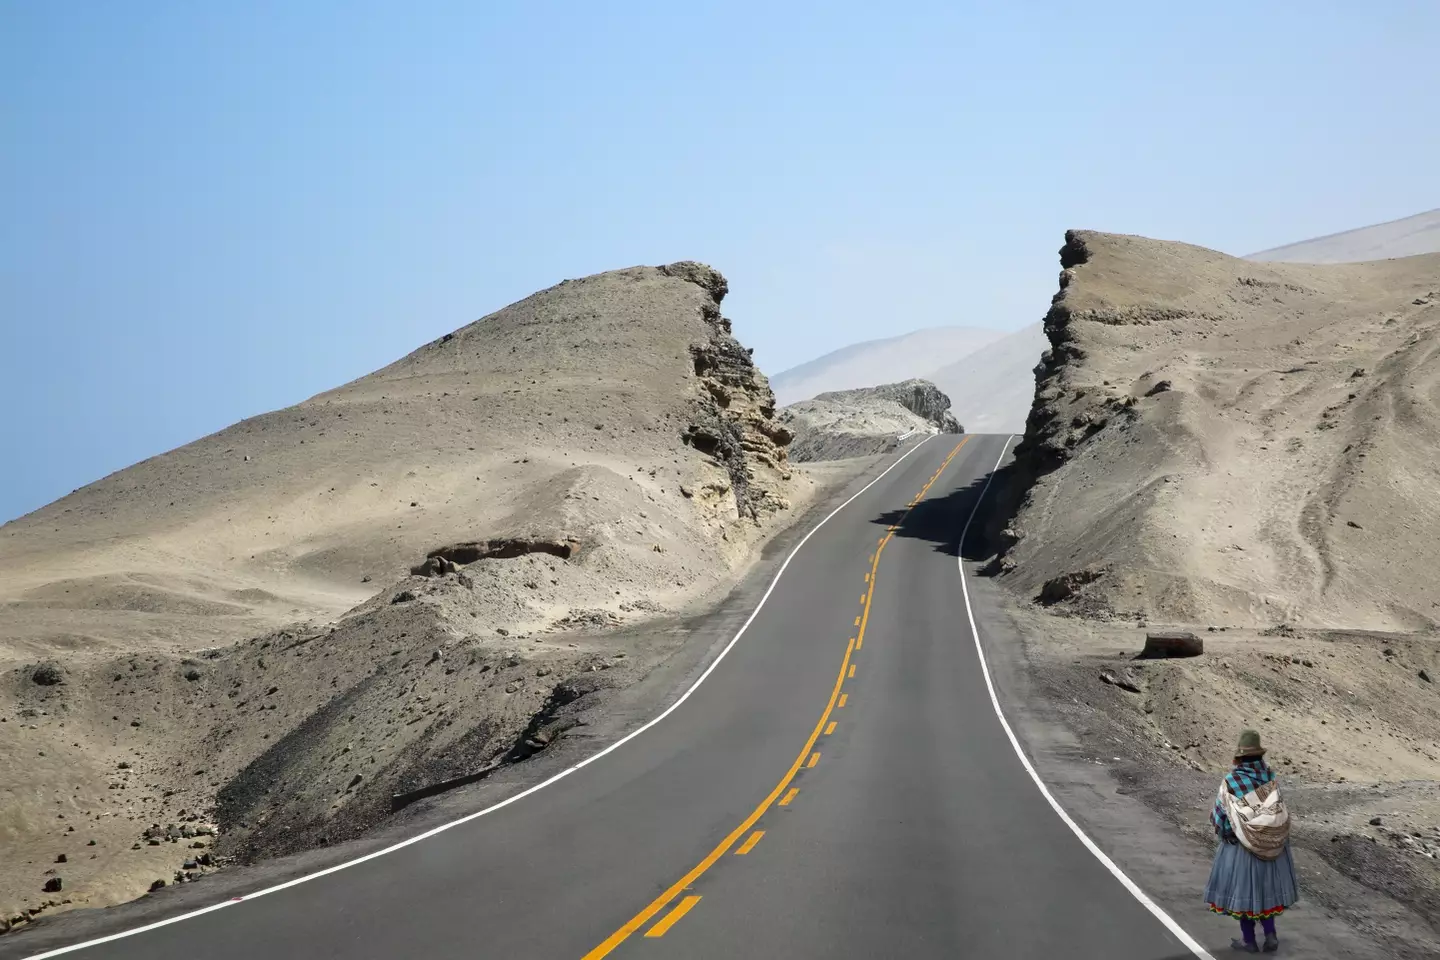 The Pan-American Highway had a slow construction.